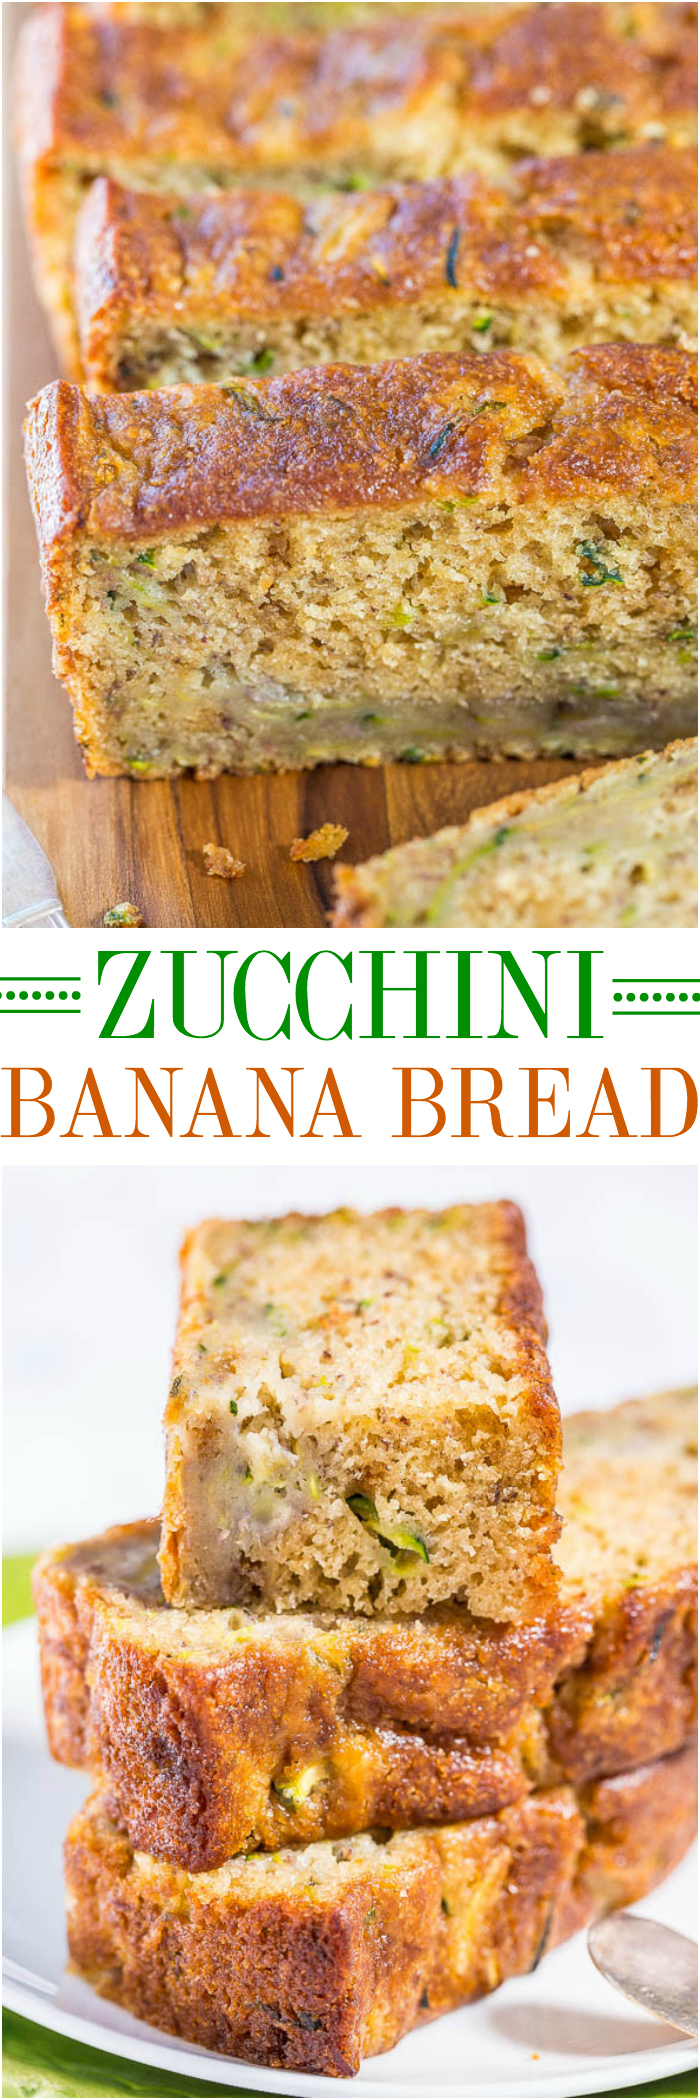 This Zucchini Banana Bread is so soft, tender, uber-moist, dense enough to be satisfying, but still light! It’s just sweet enough to taste like a dessert and not like you’re eating vegetables. It really is the BEST zucchini bread recipe!!